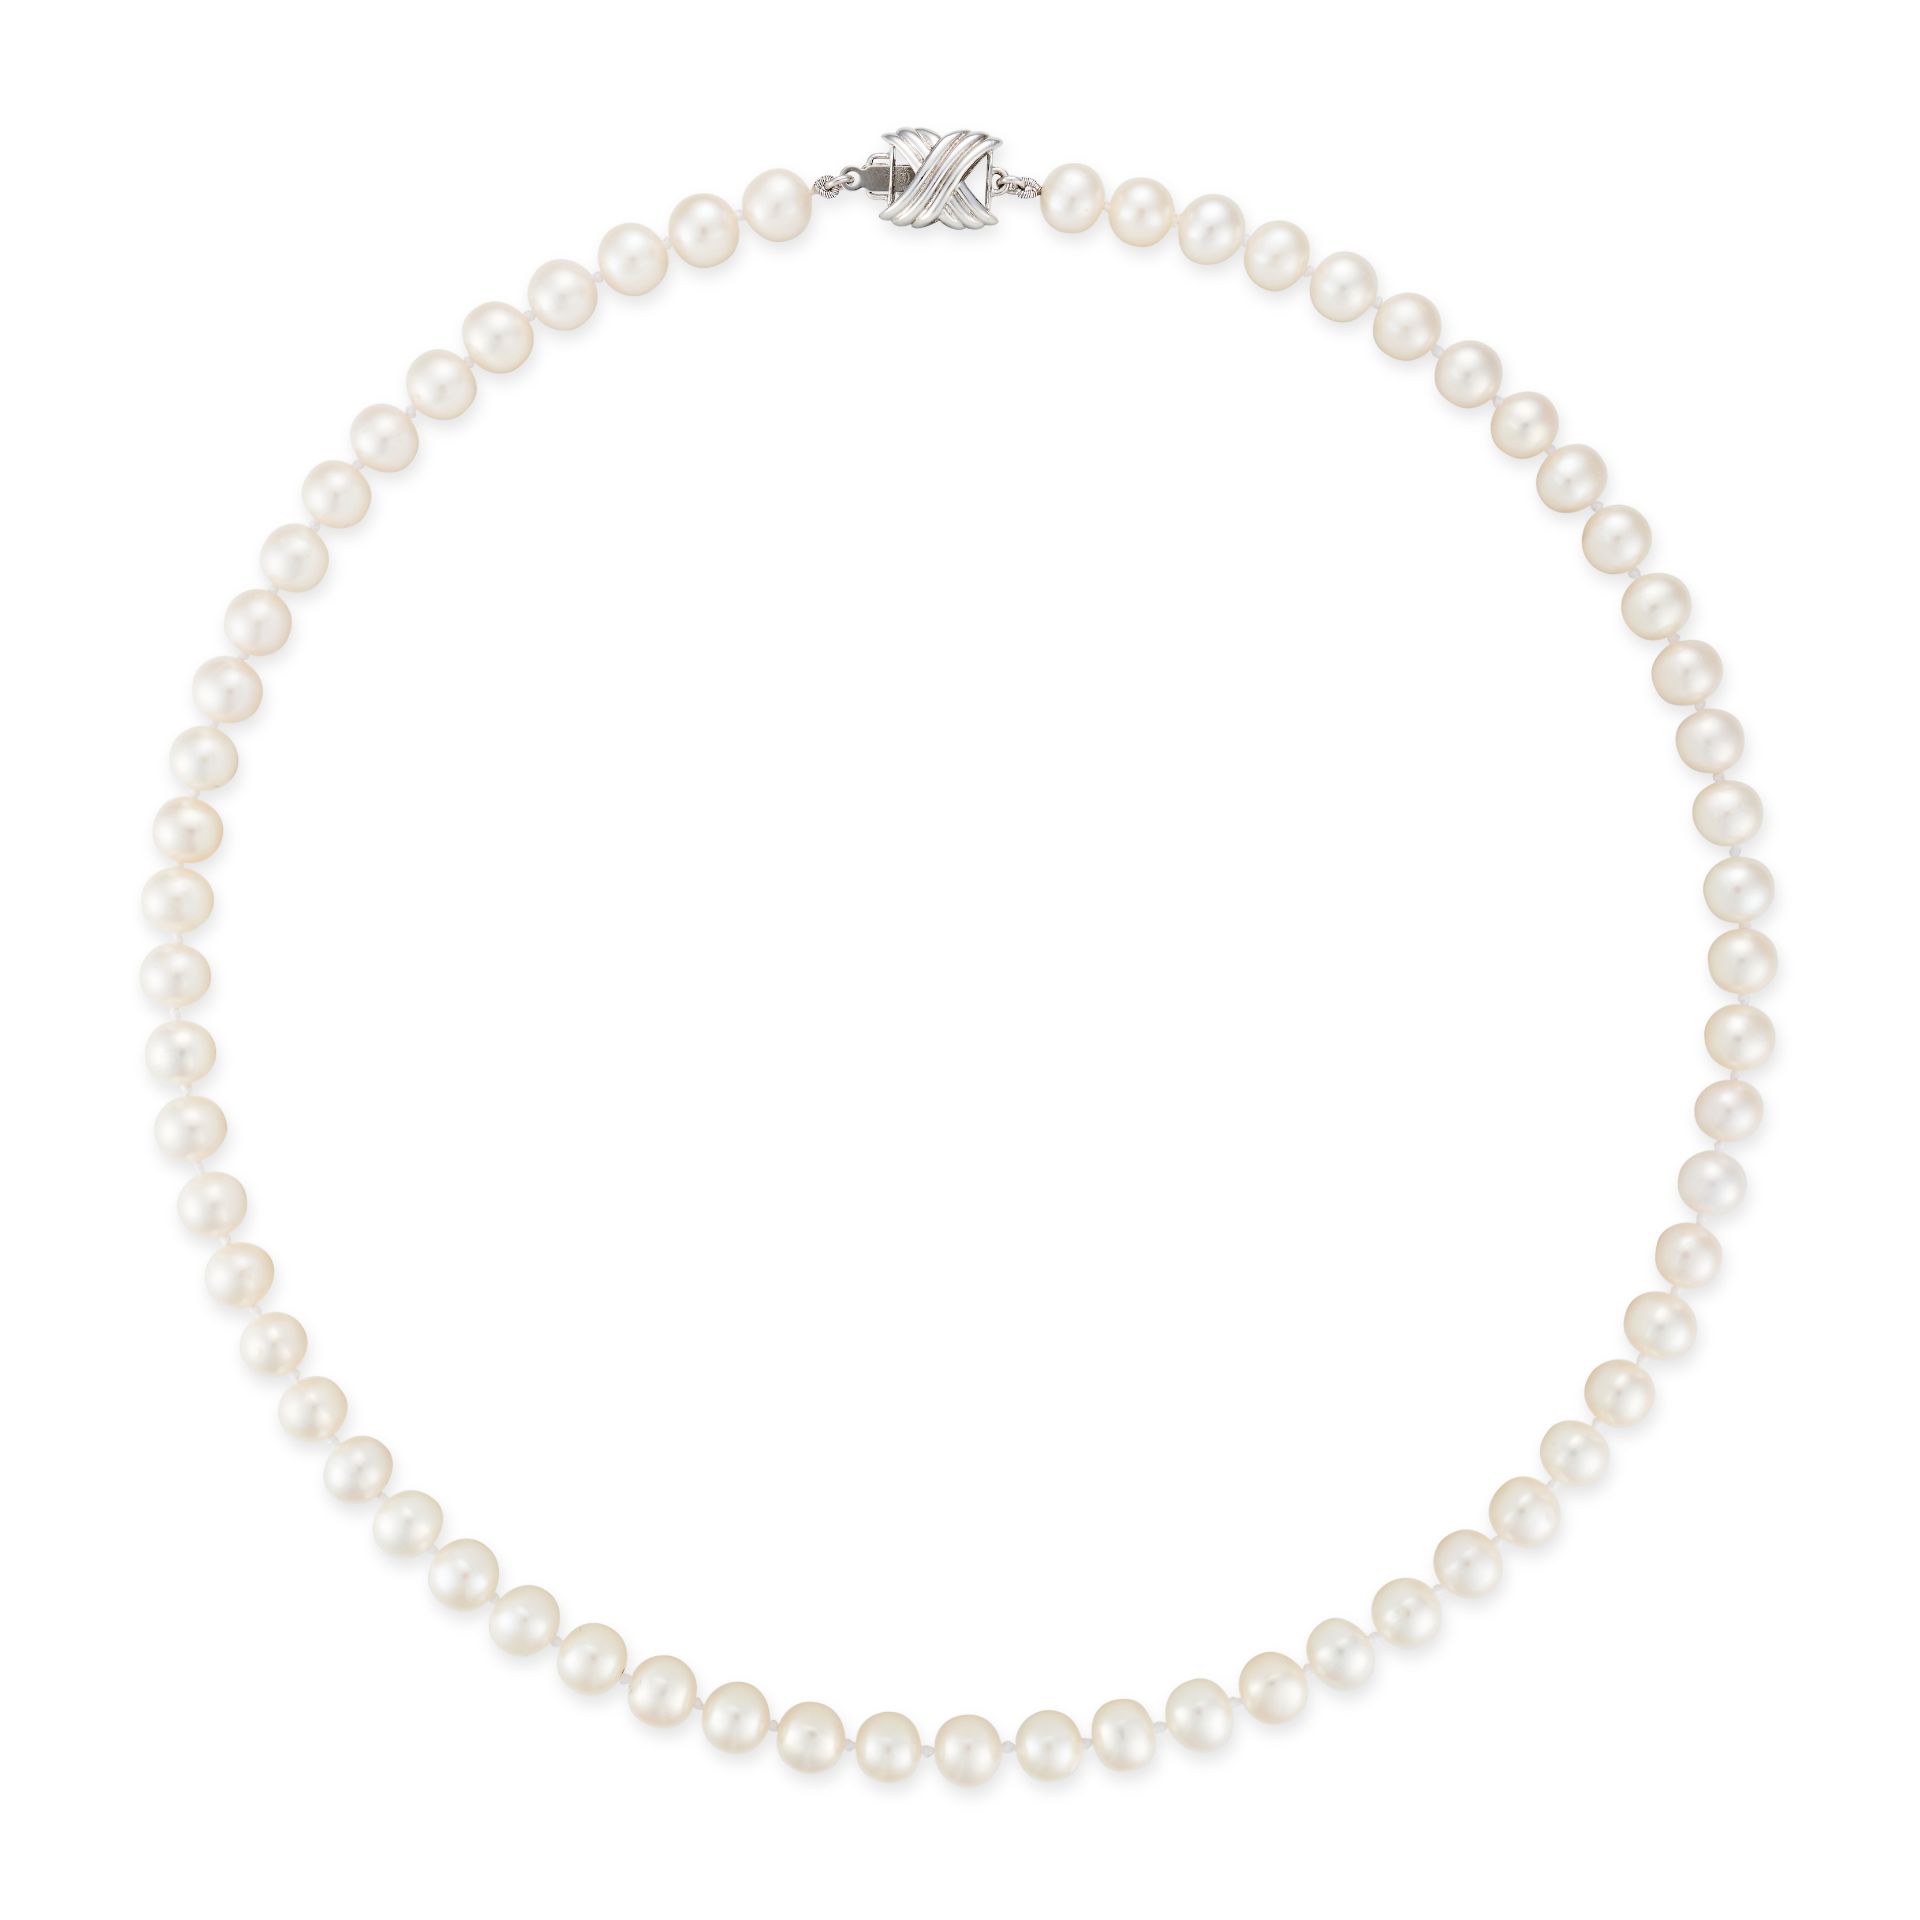 NO RESERVE - A PEARL NECKLACE comprising a single row of pearls, stamped 925, 47.0cm, 27.9g.